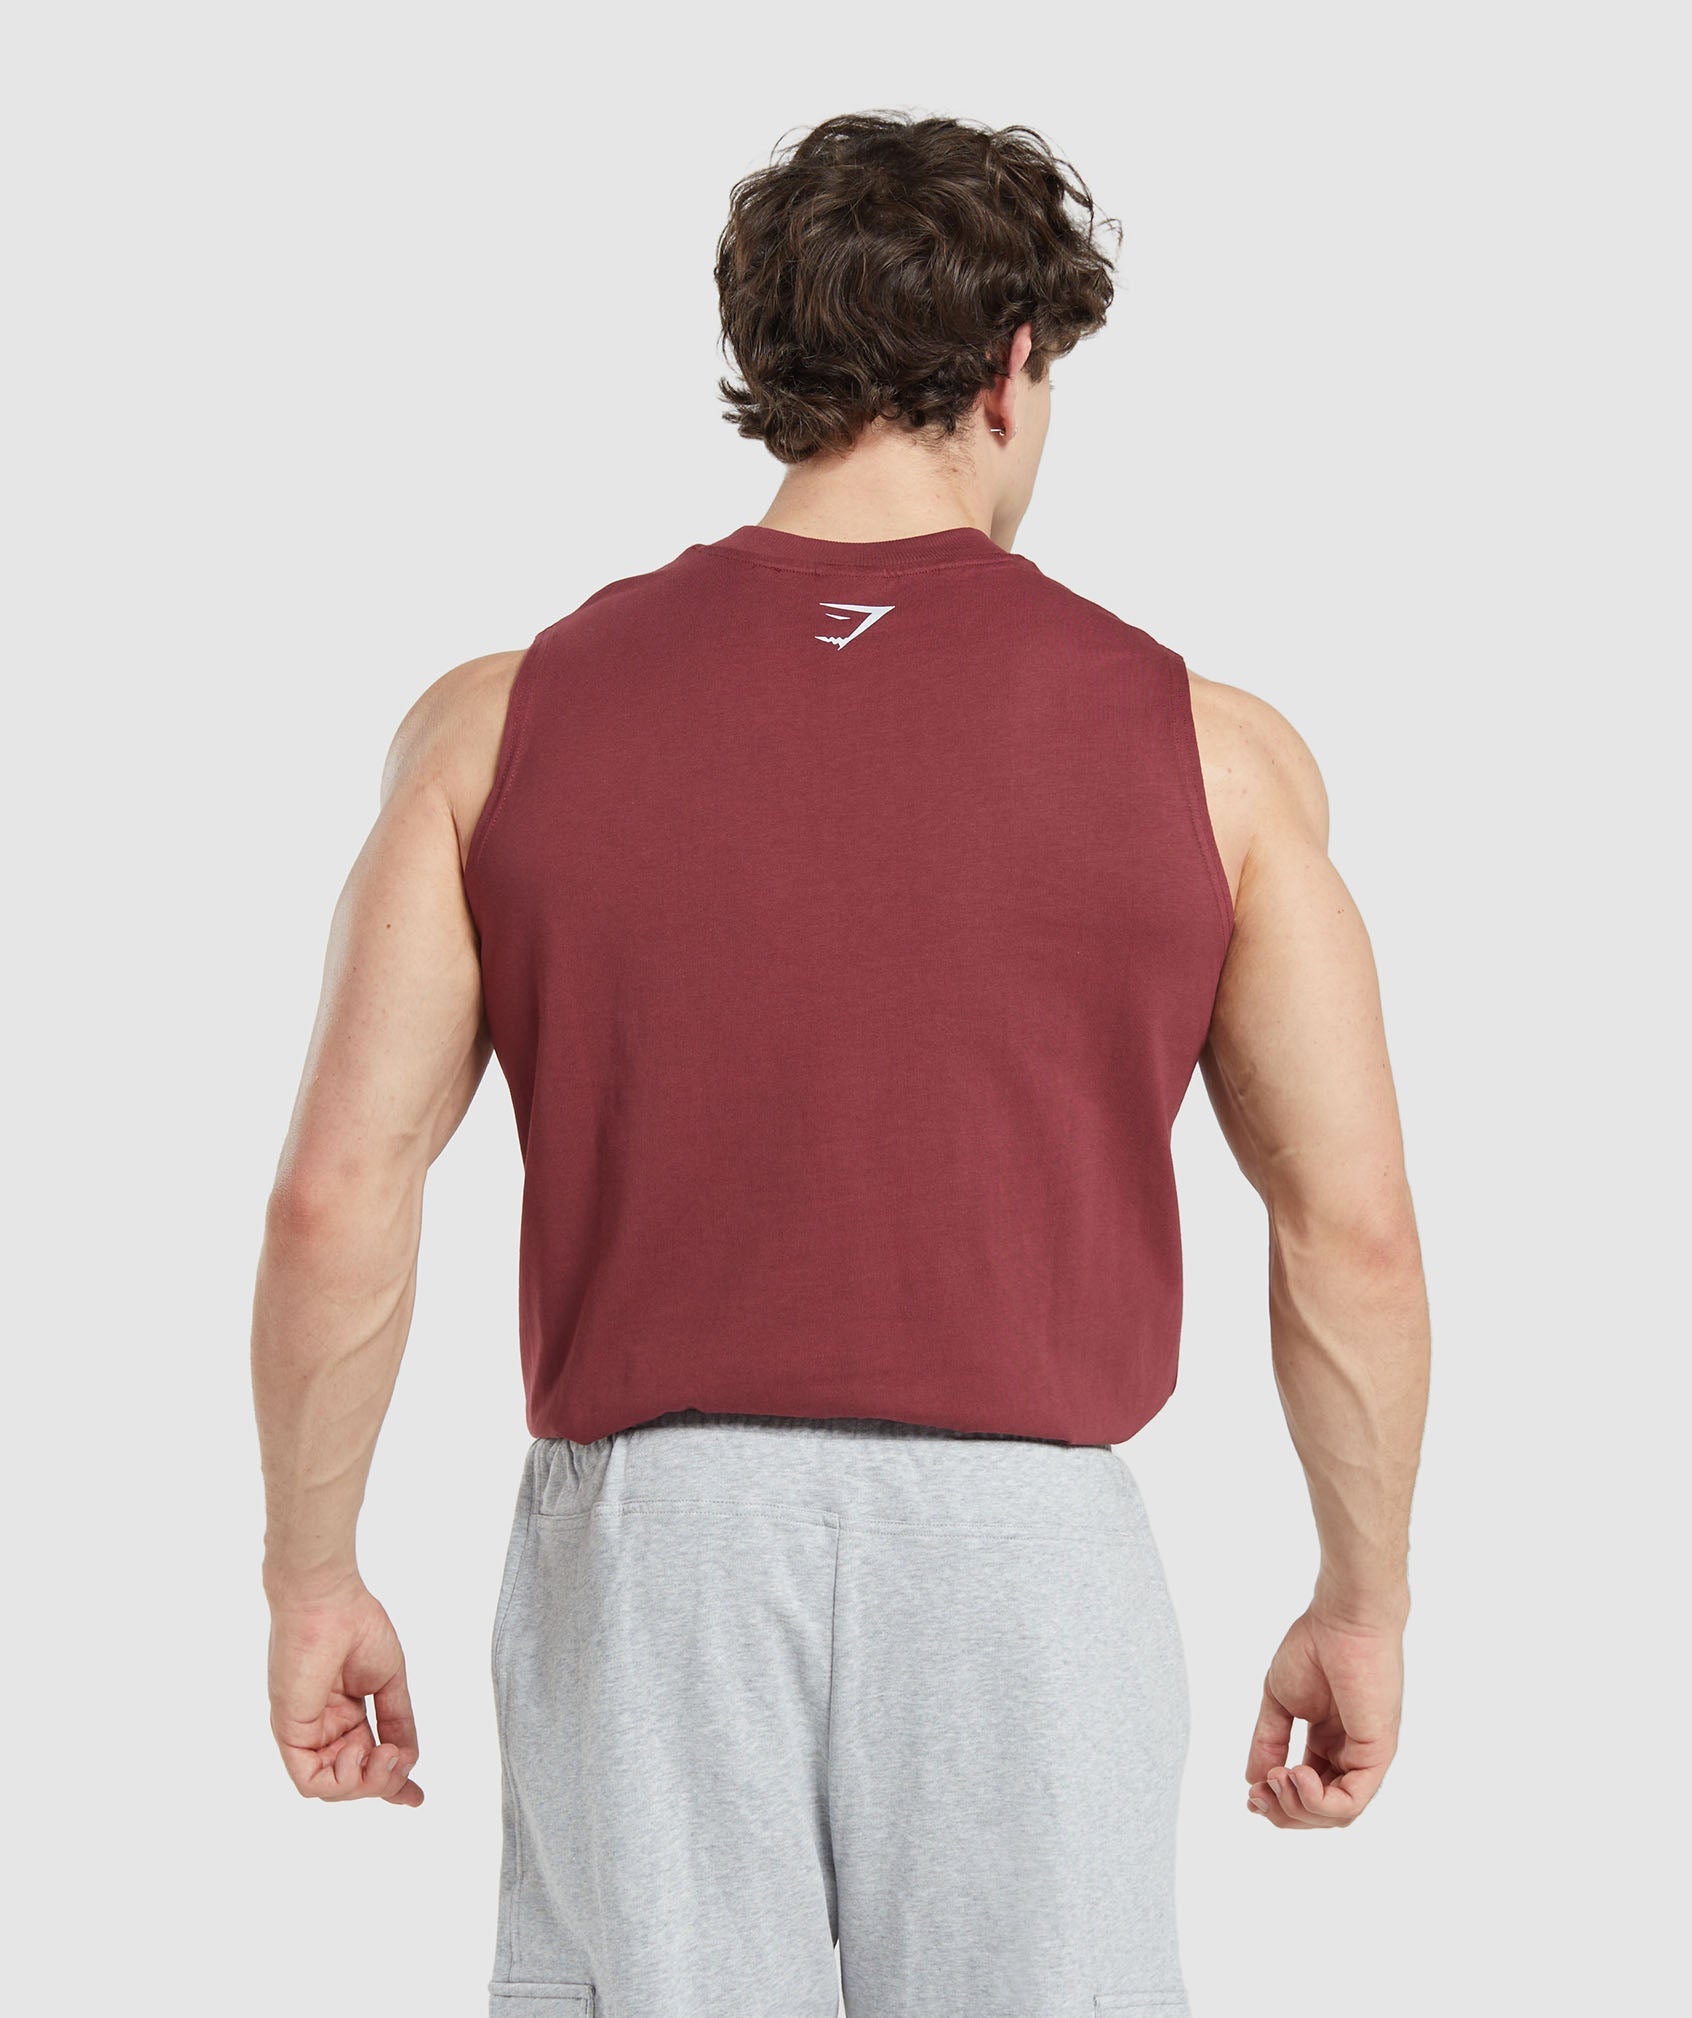 Weightlifting Club Tank in Washed Burgundy - view 2